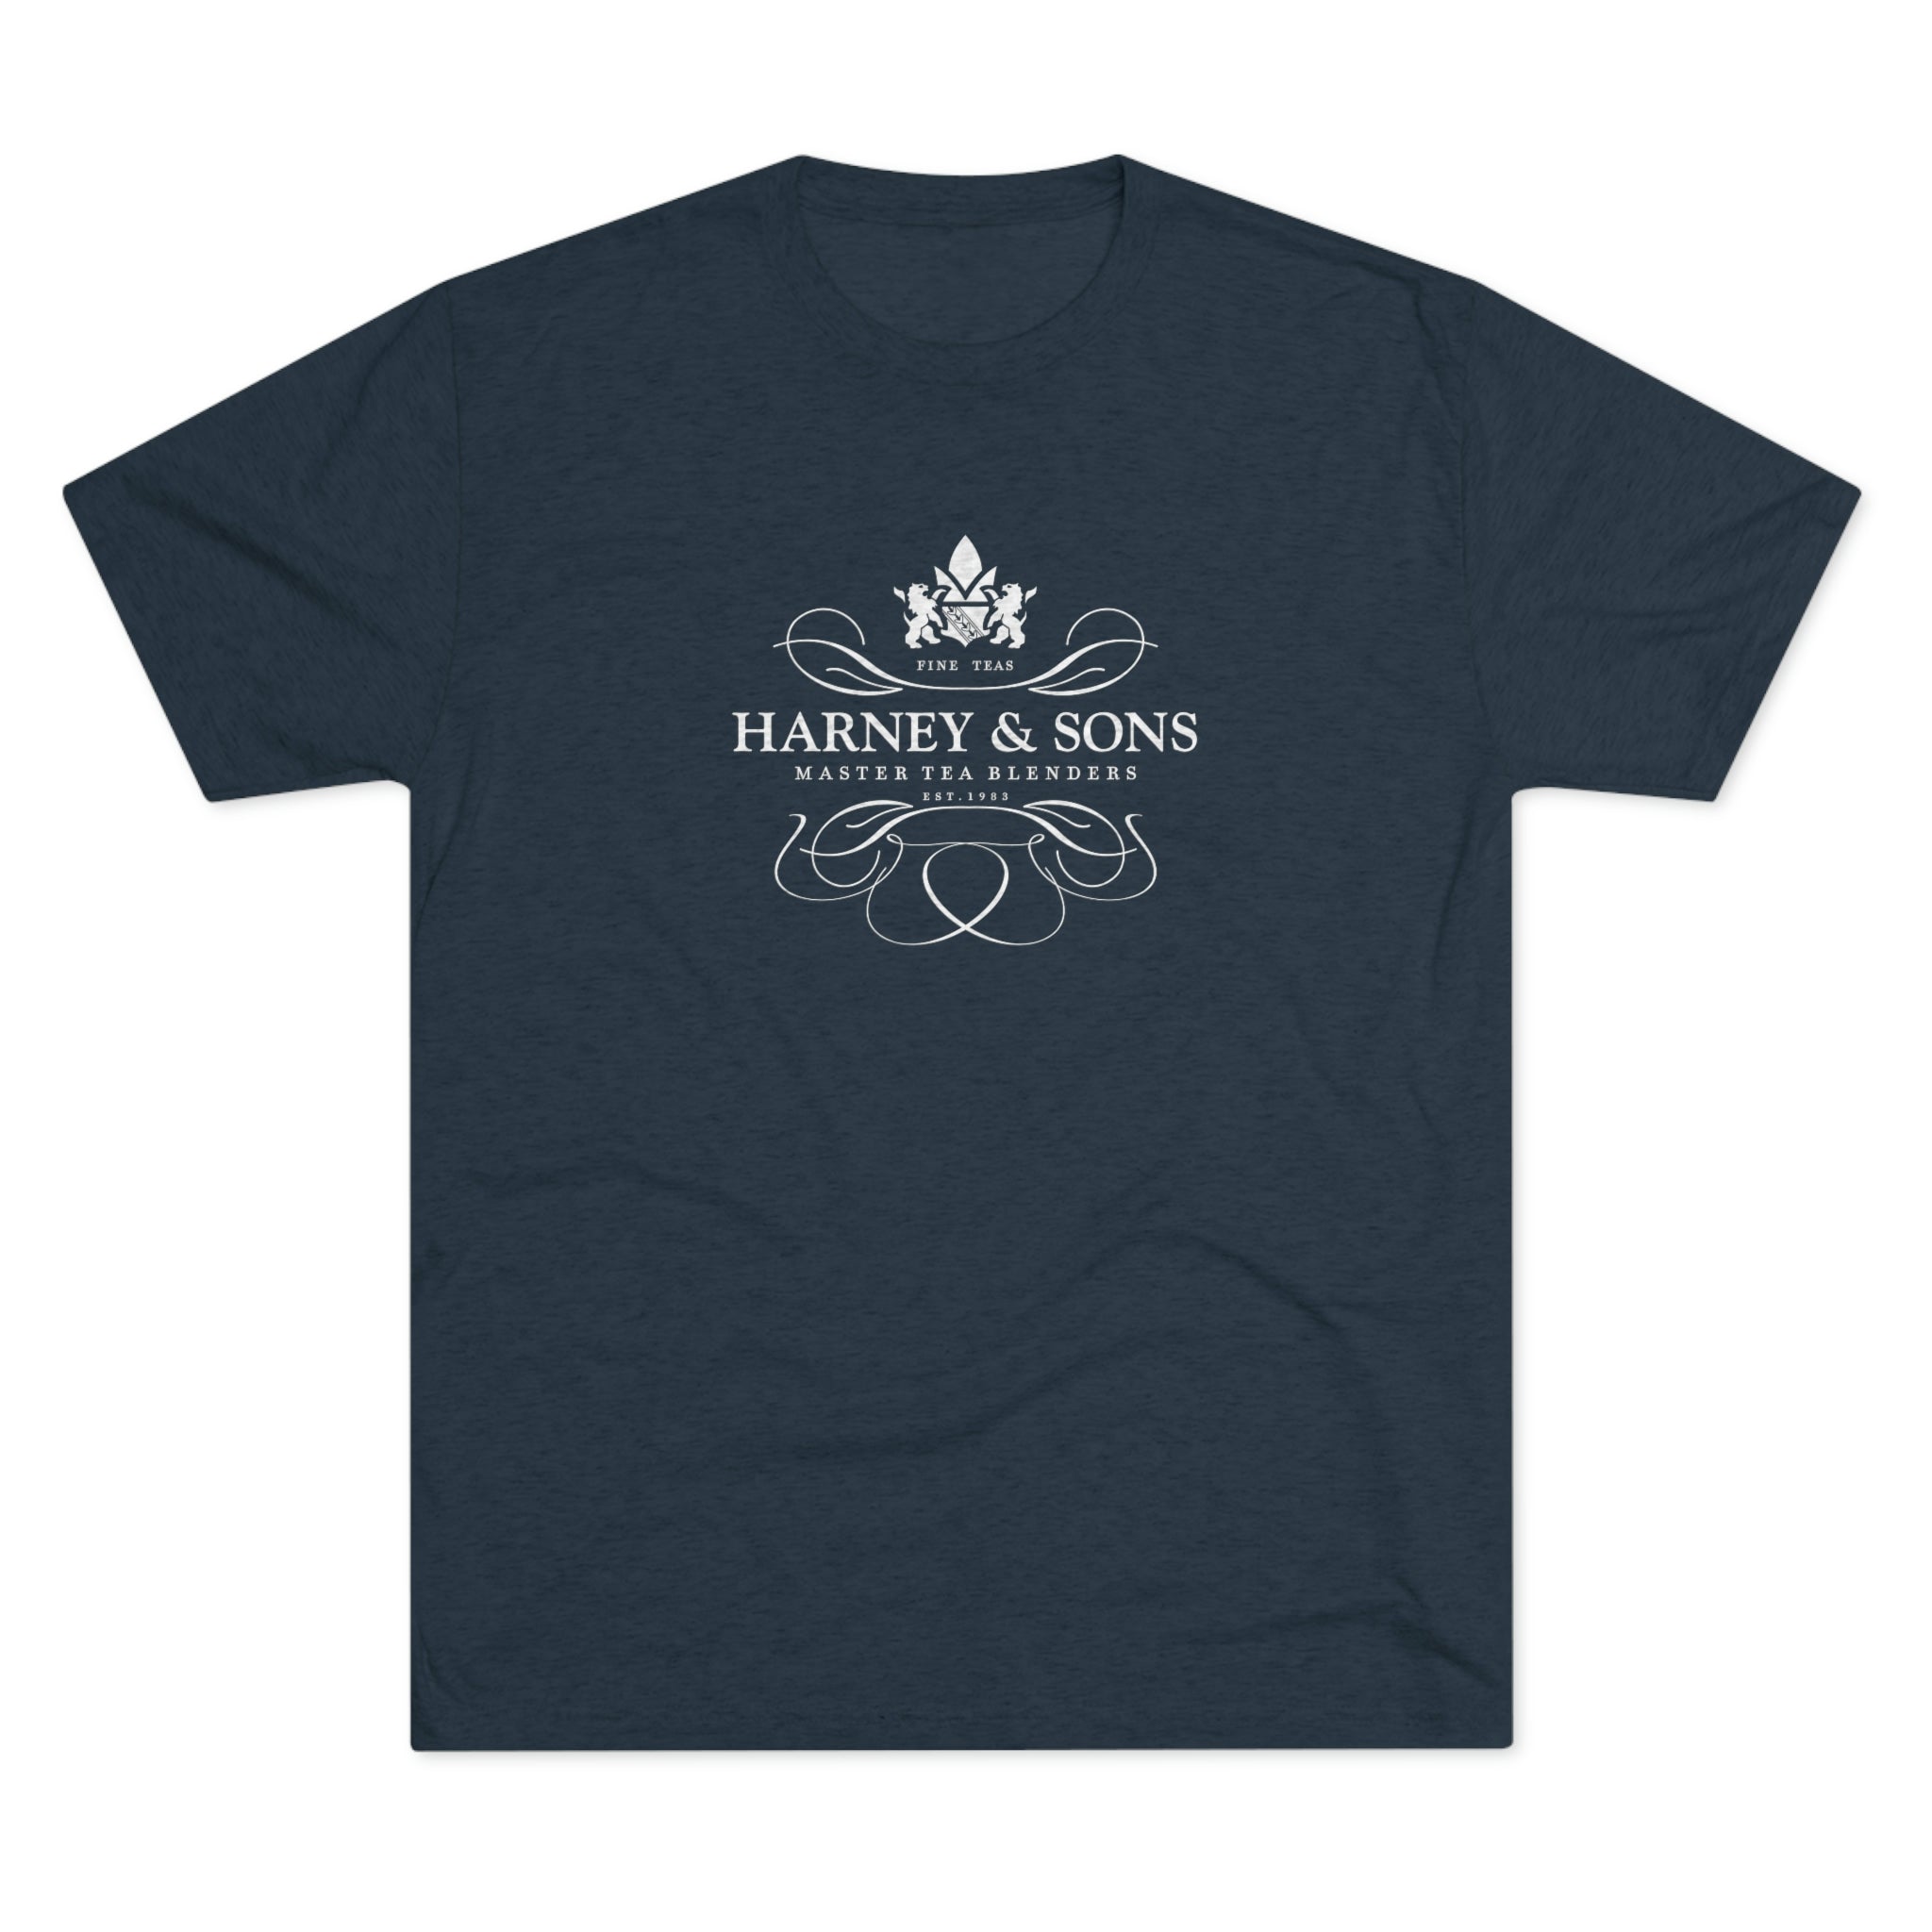 Harney & Sons Logo Graphic Tee - Tri-Blend Vintage Navy S - Harney & Sons Fine Teas